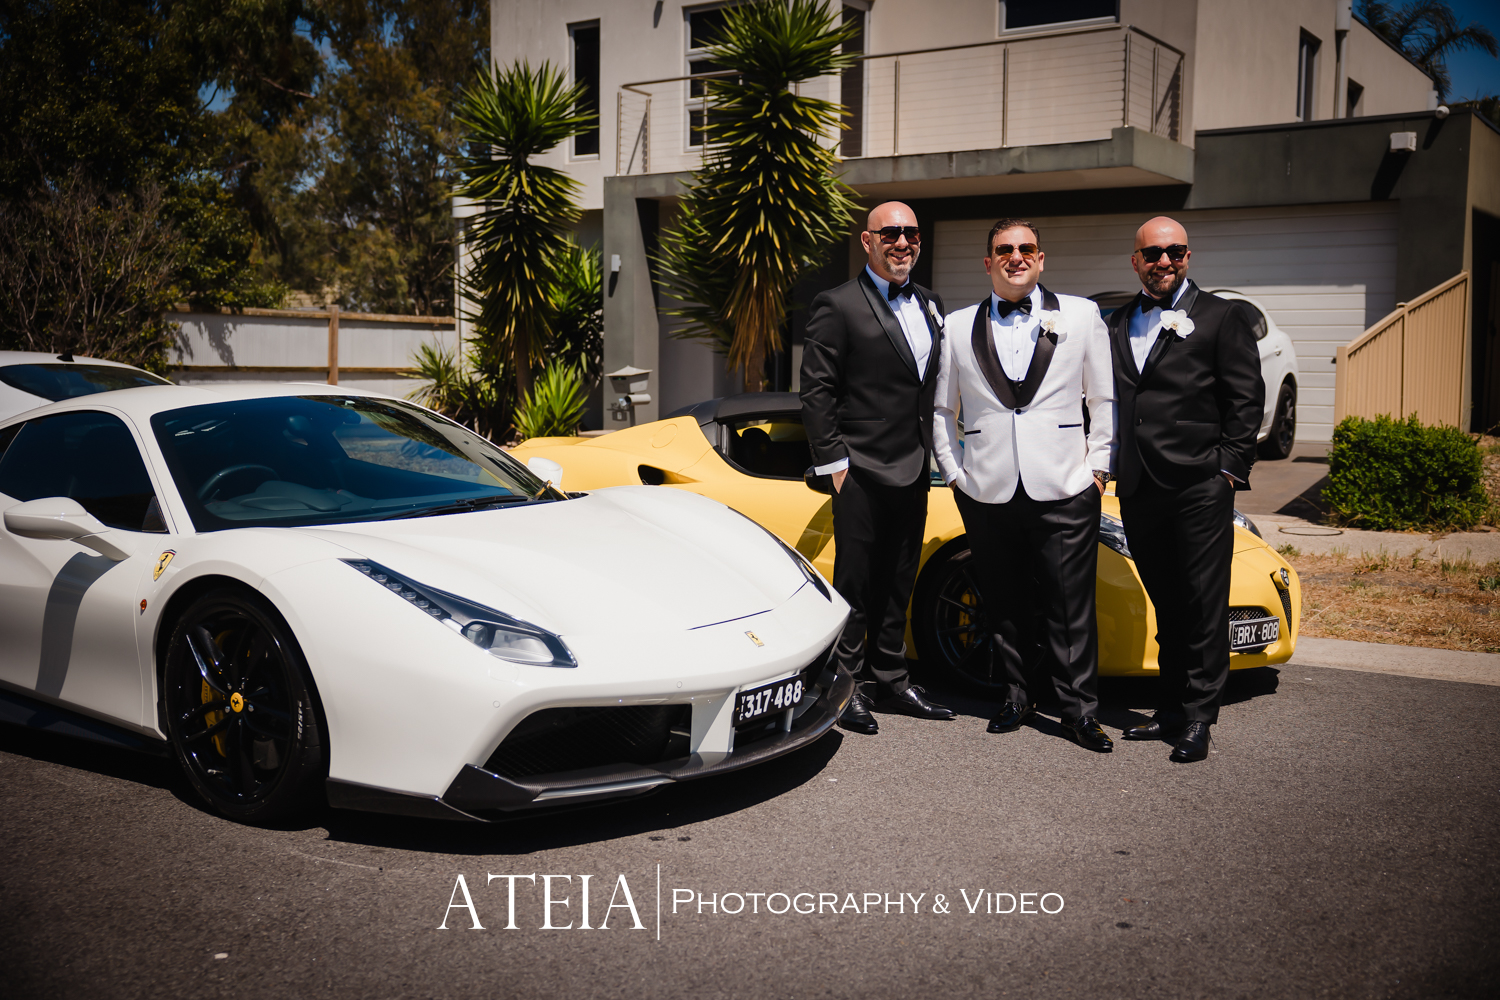 , Sonia and Robert&#8217;s wedding photography at Werribee Mansion captured by ATEIA Photography &#038; Video